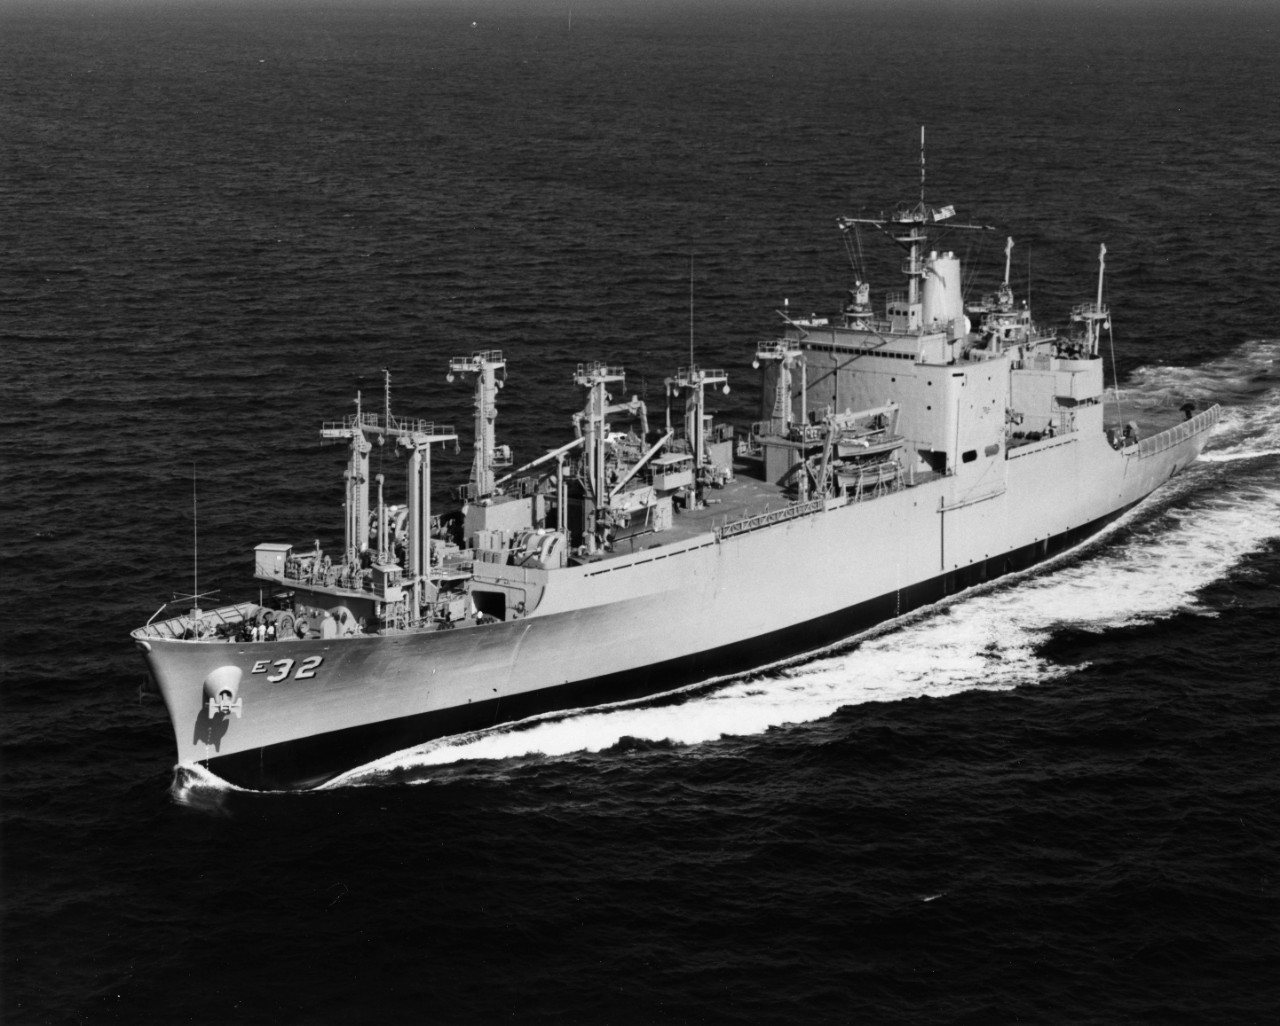 USS Flint (AE-32) underway off Pascagoula, Mississippi, probably during builders' trials.